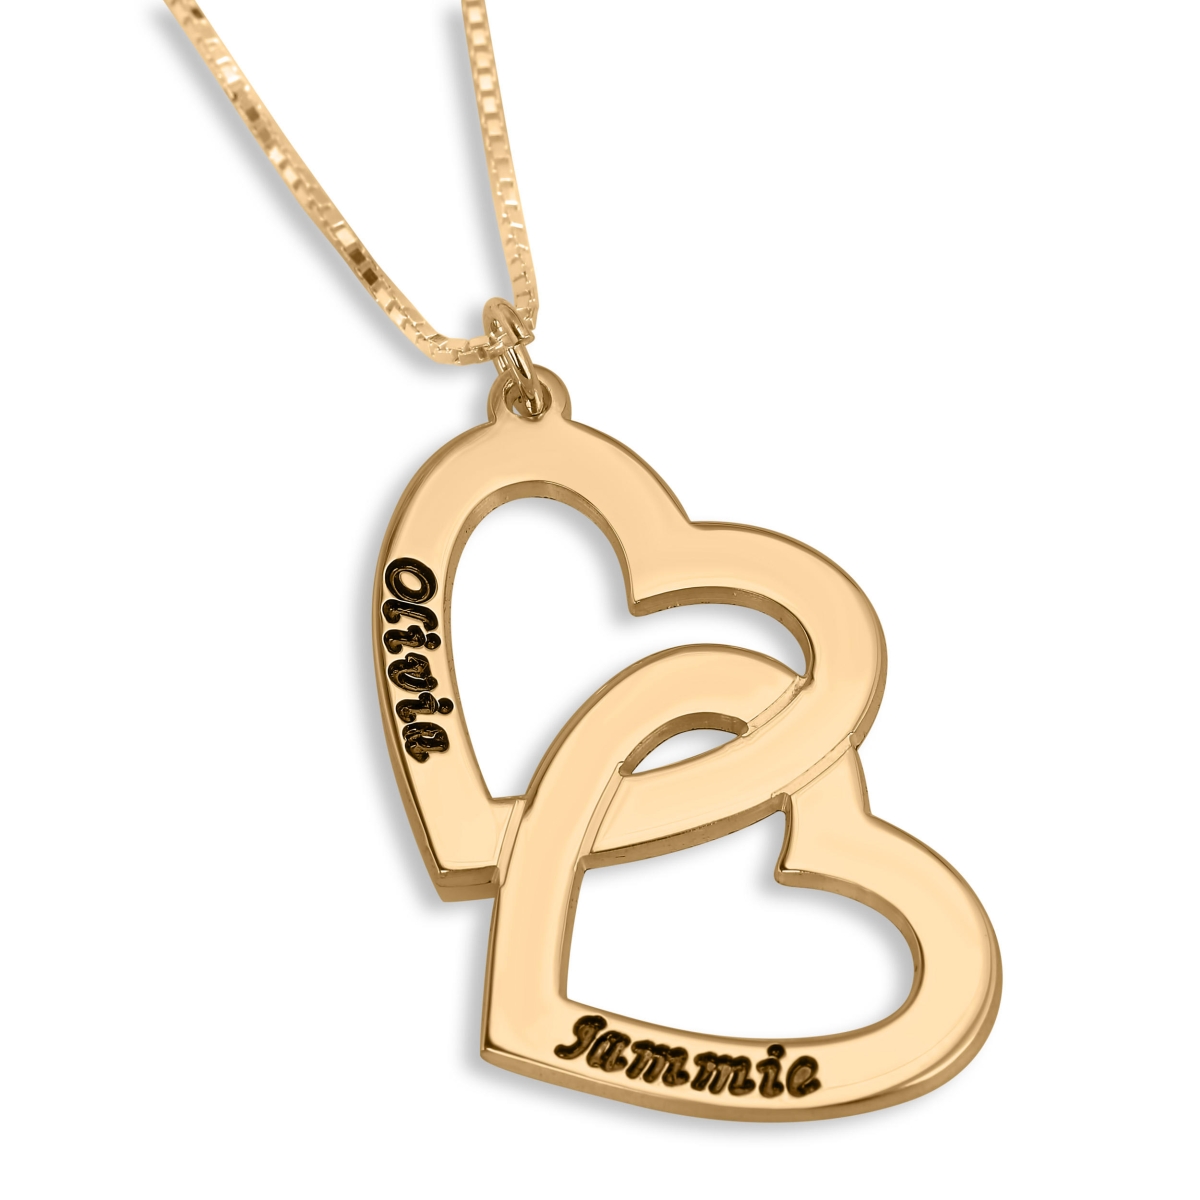 Linked Hearts Double Name Necklace, 24k Gold Plated - 1